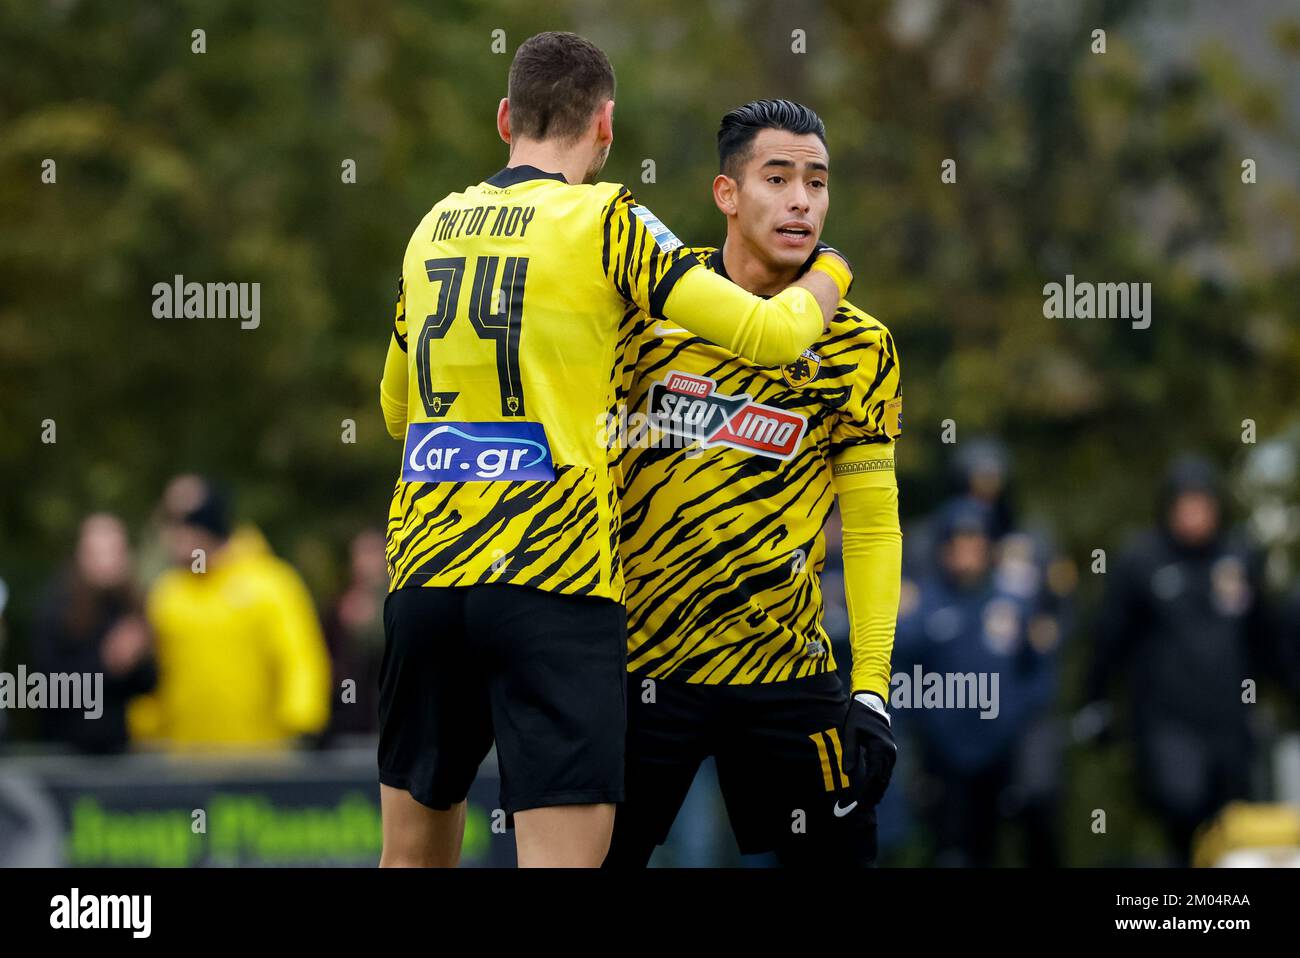 BURGH-HAAMSTEDE, NETHERLANDS - DECEMBER 4: Gerasimos Mitoglou of AEK Athens and Sergio Araujo of AEK Athens during the Friendly match between AEK Athens and RFC Seraing at Sportpark van Zuijen on December 4, 2022 in Burgh-Haamstede, Netherlands (Photo by Broer van den Boom/Orange Pictures) Stock Photo